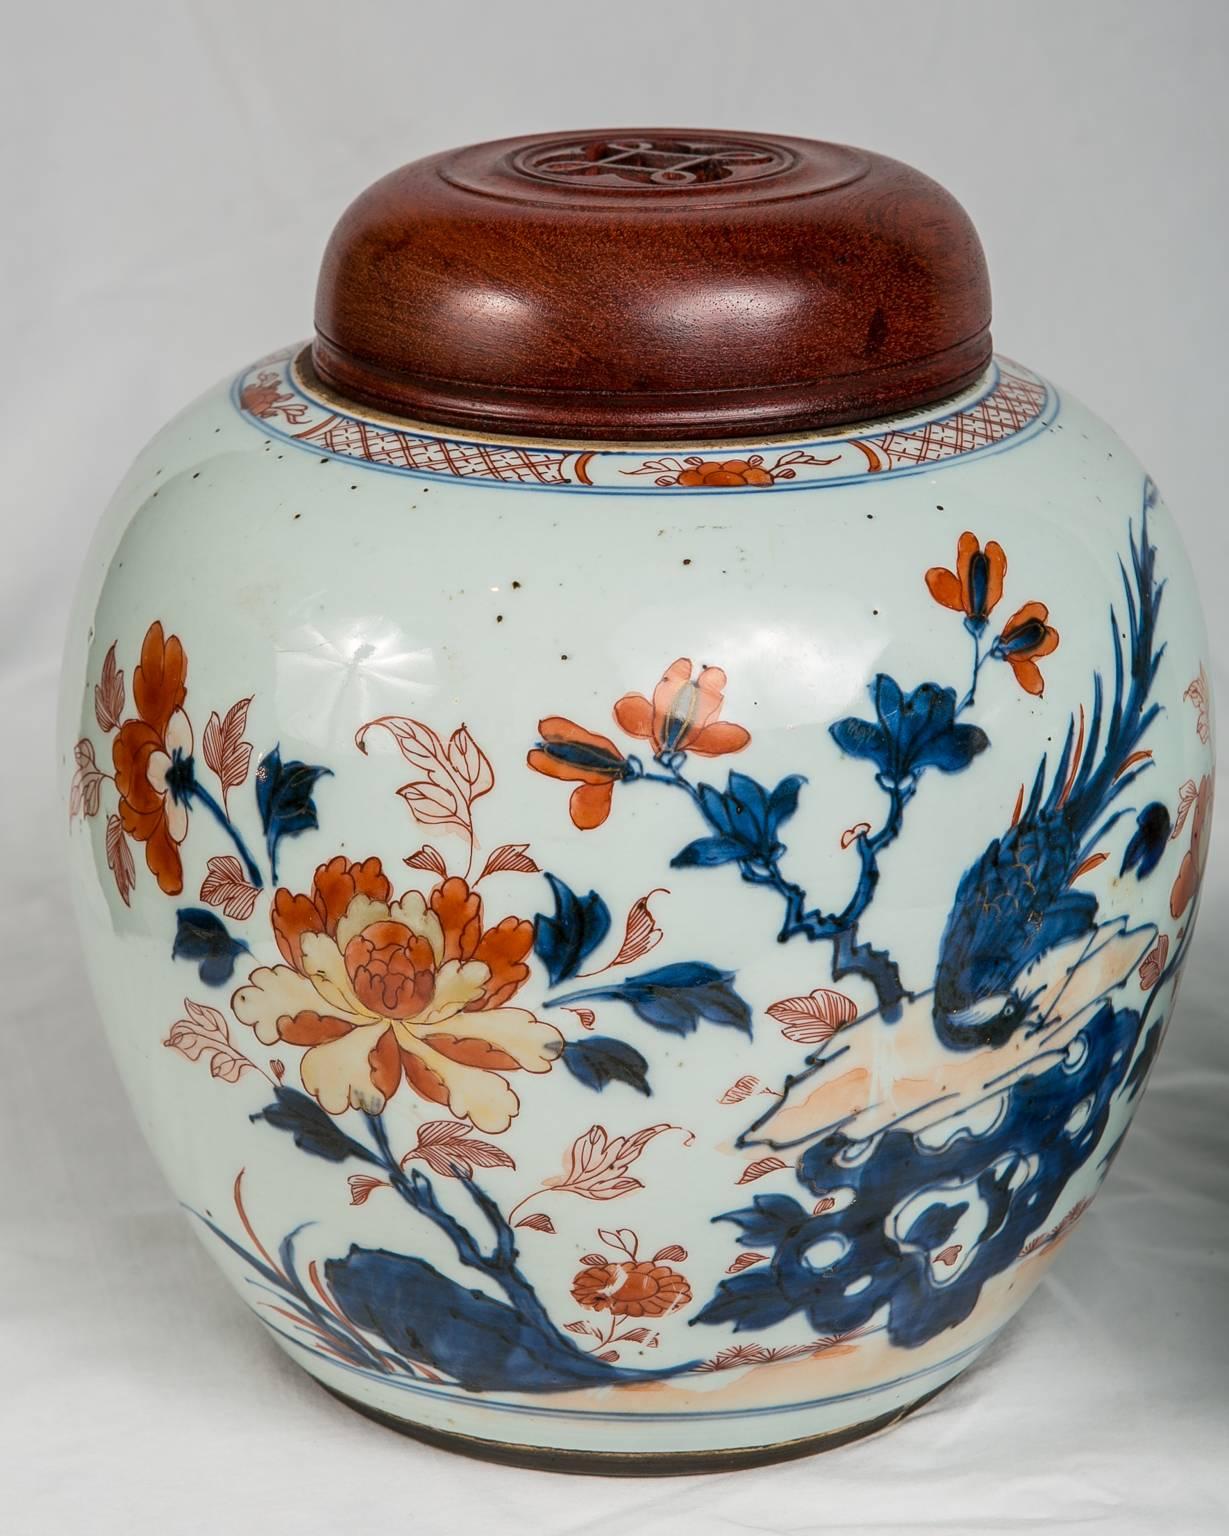 Provenance: with the label of Elinor Gordon.
Chinese Imari ginger jars made in the mid 18th century circa 1760 
(Dauguong  (1820-1850). Each jar is painted in cobalt blue and orange showing a butterfly and a long tailed bird on a rocky outcropping.